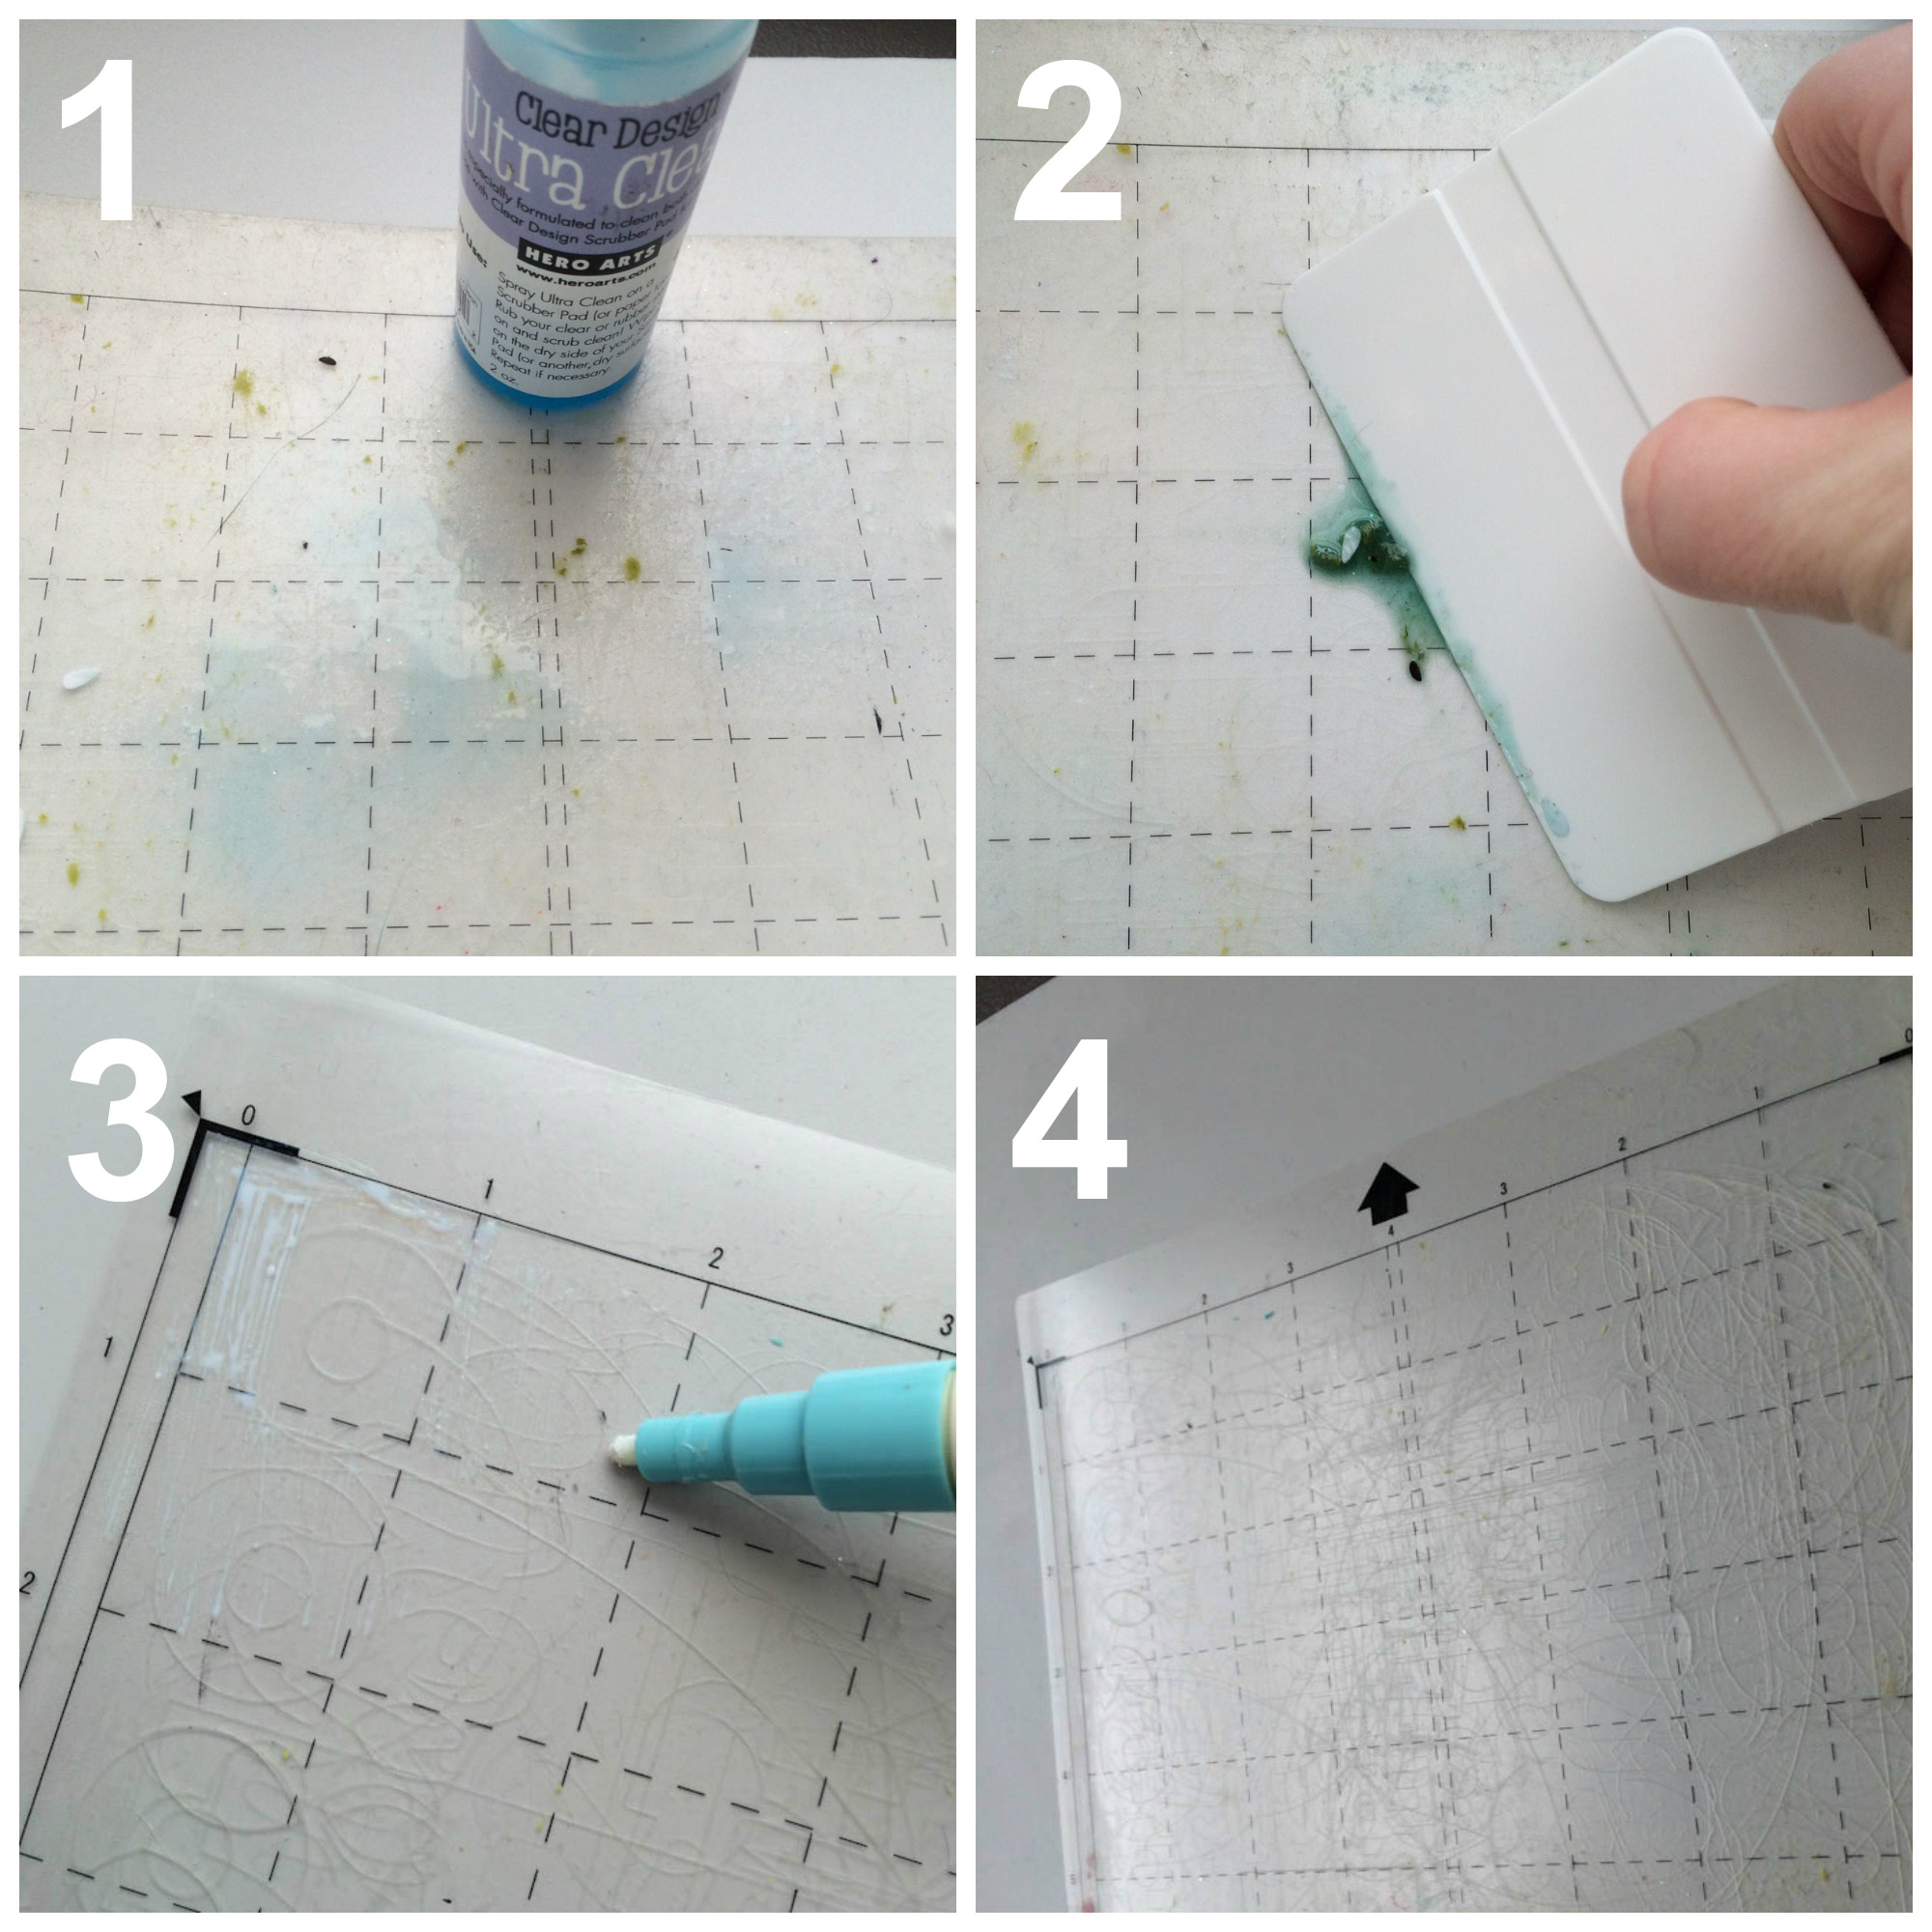 Die Cut Tips: re-stick your cutting mat